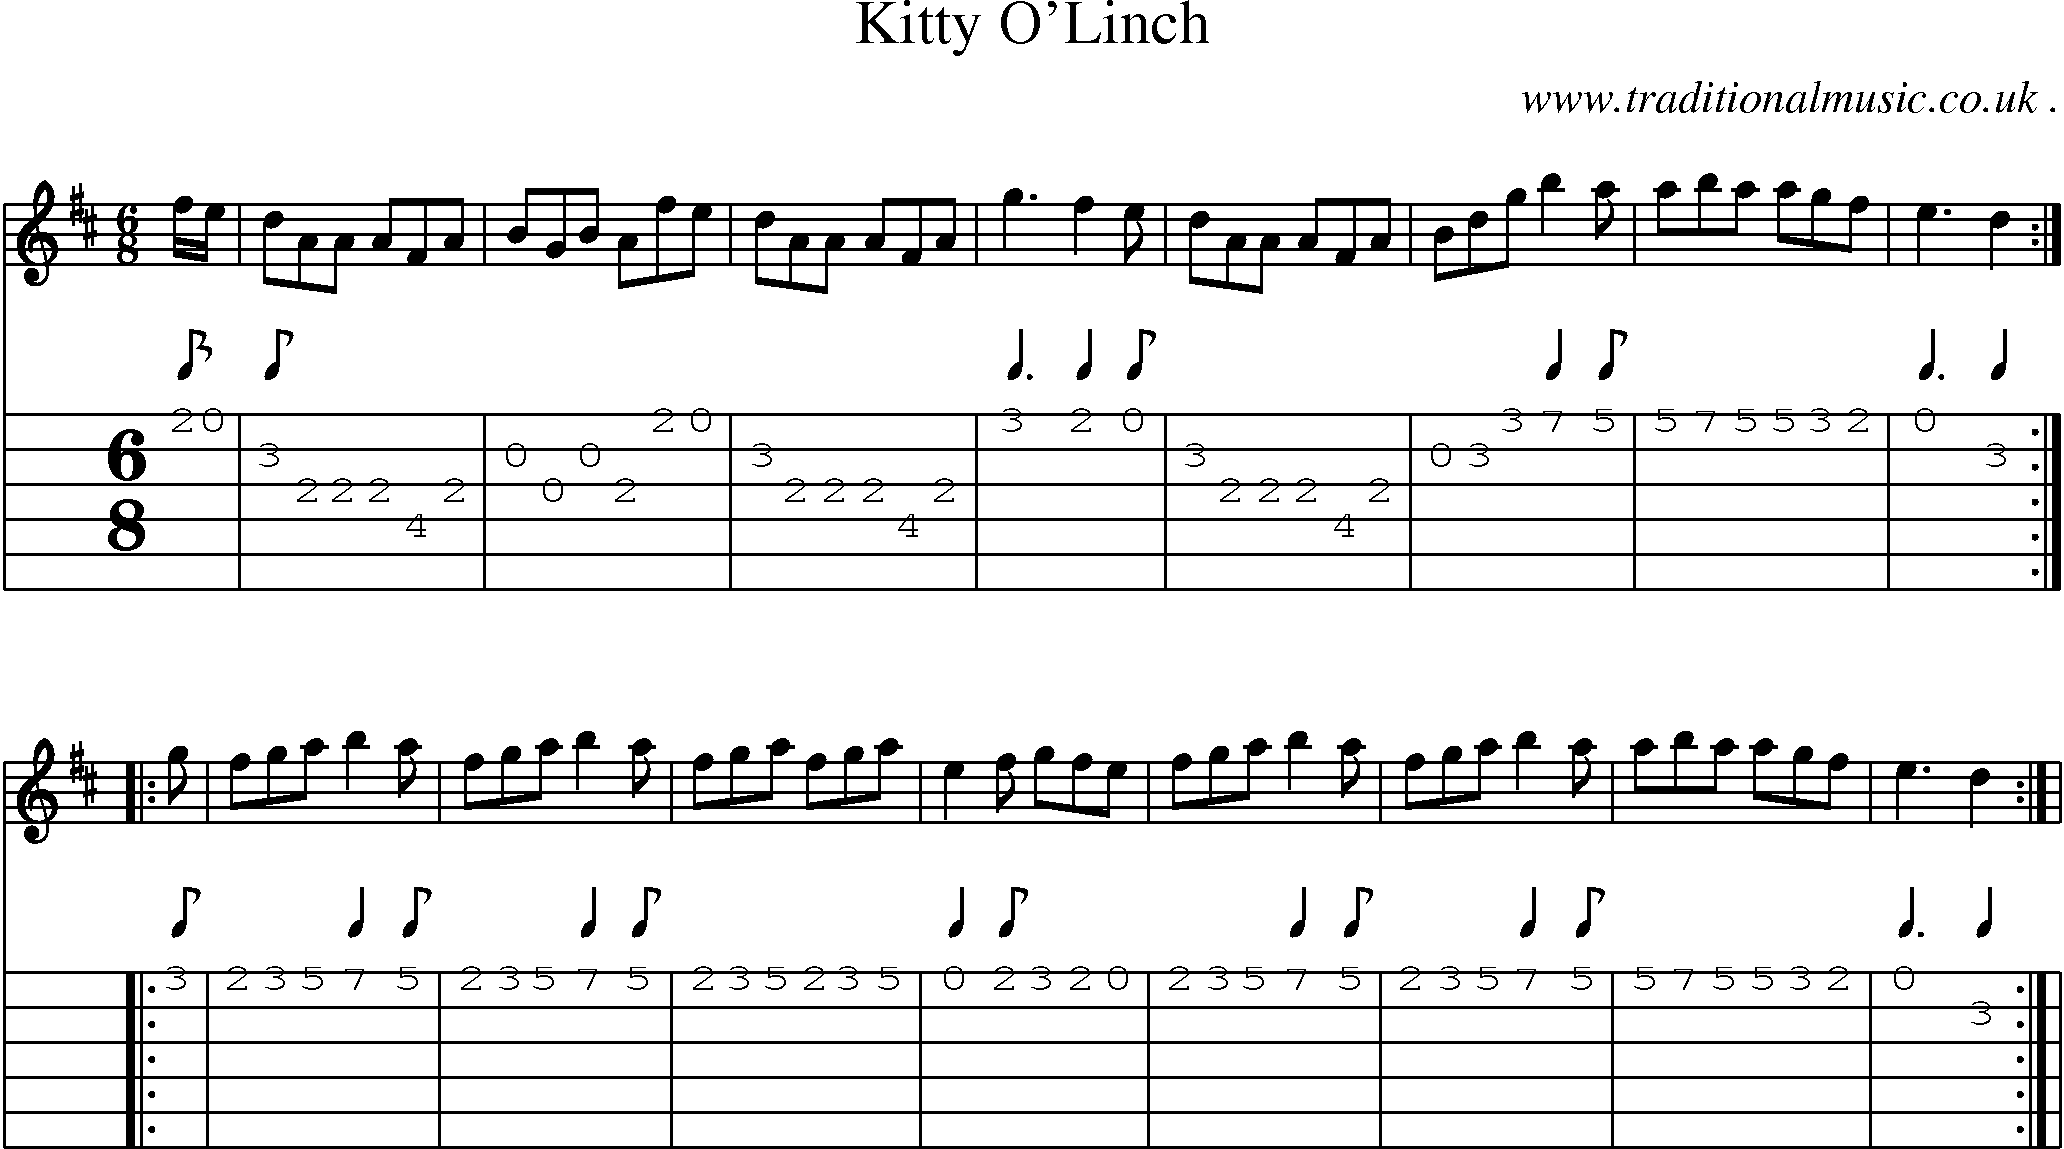 Sheet-Music and Guitar Tabs for Kitty Olinch